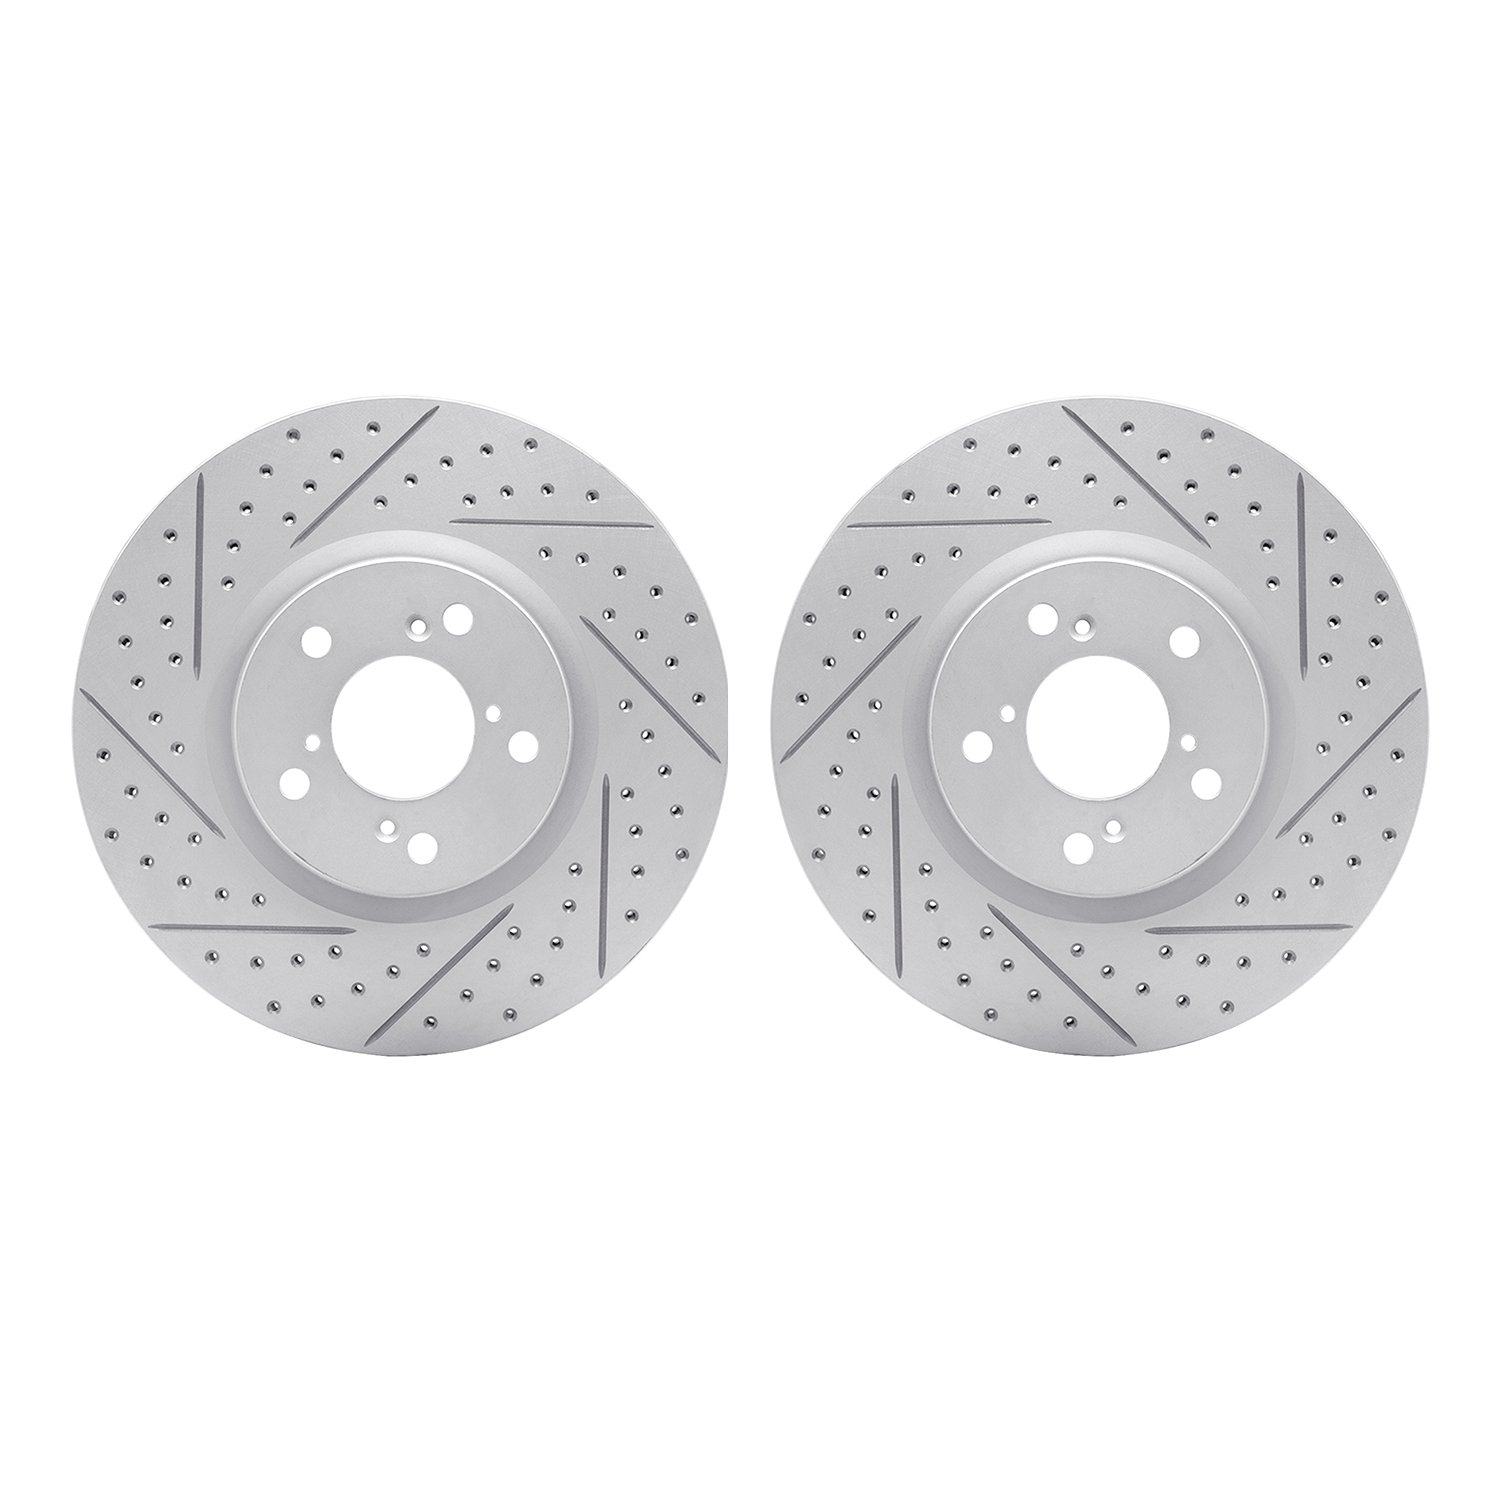 2002-59011 Geoperformance Drilled/Slotted Brake Rotors, 2007-2020 Acura/Honda, Position: Front